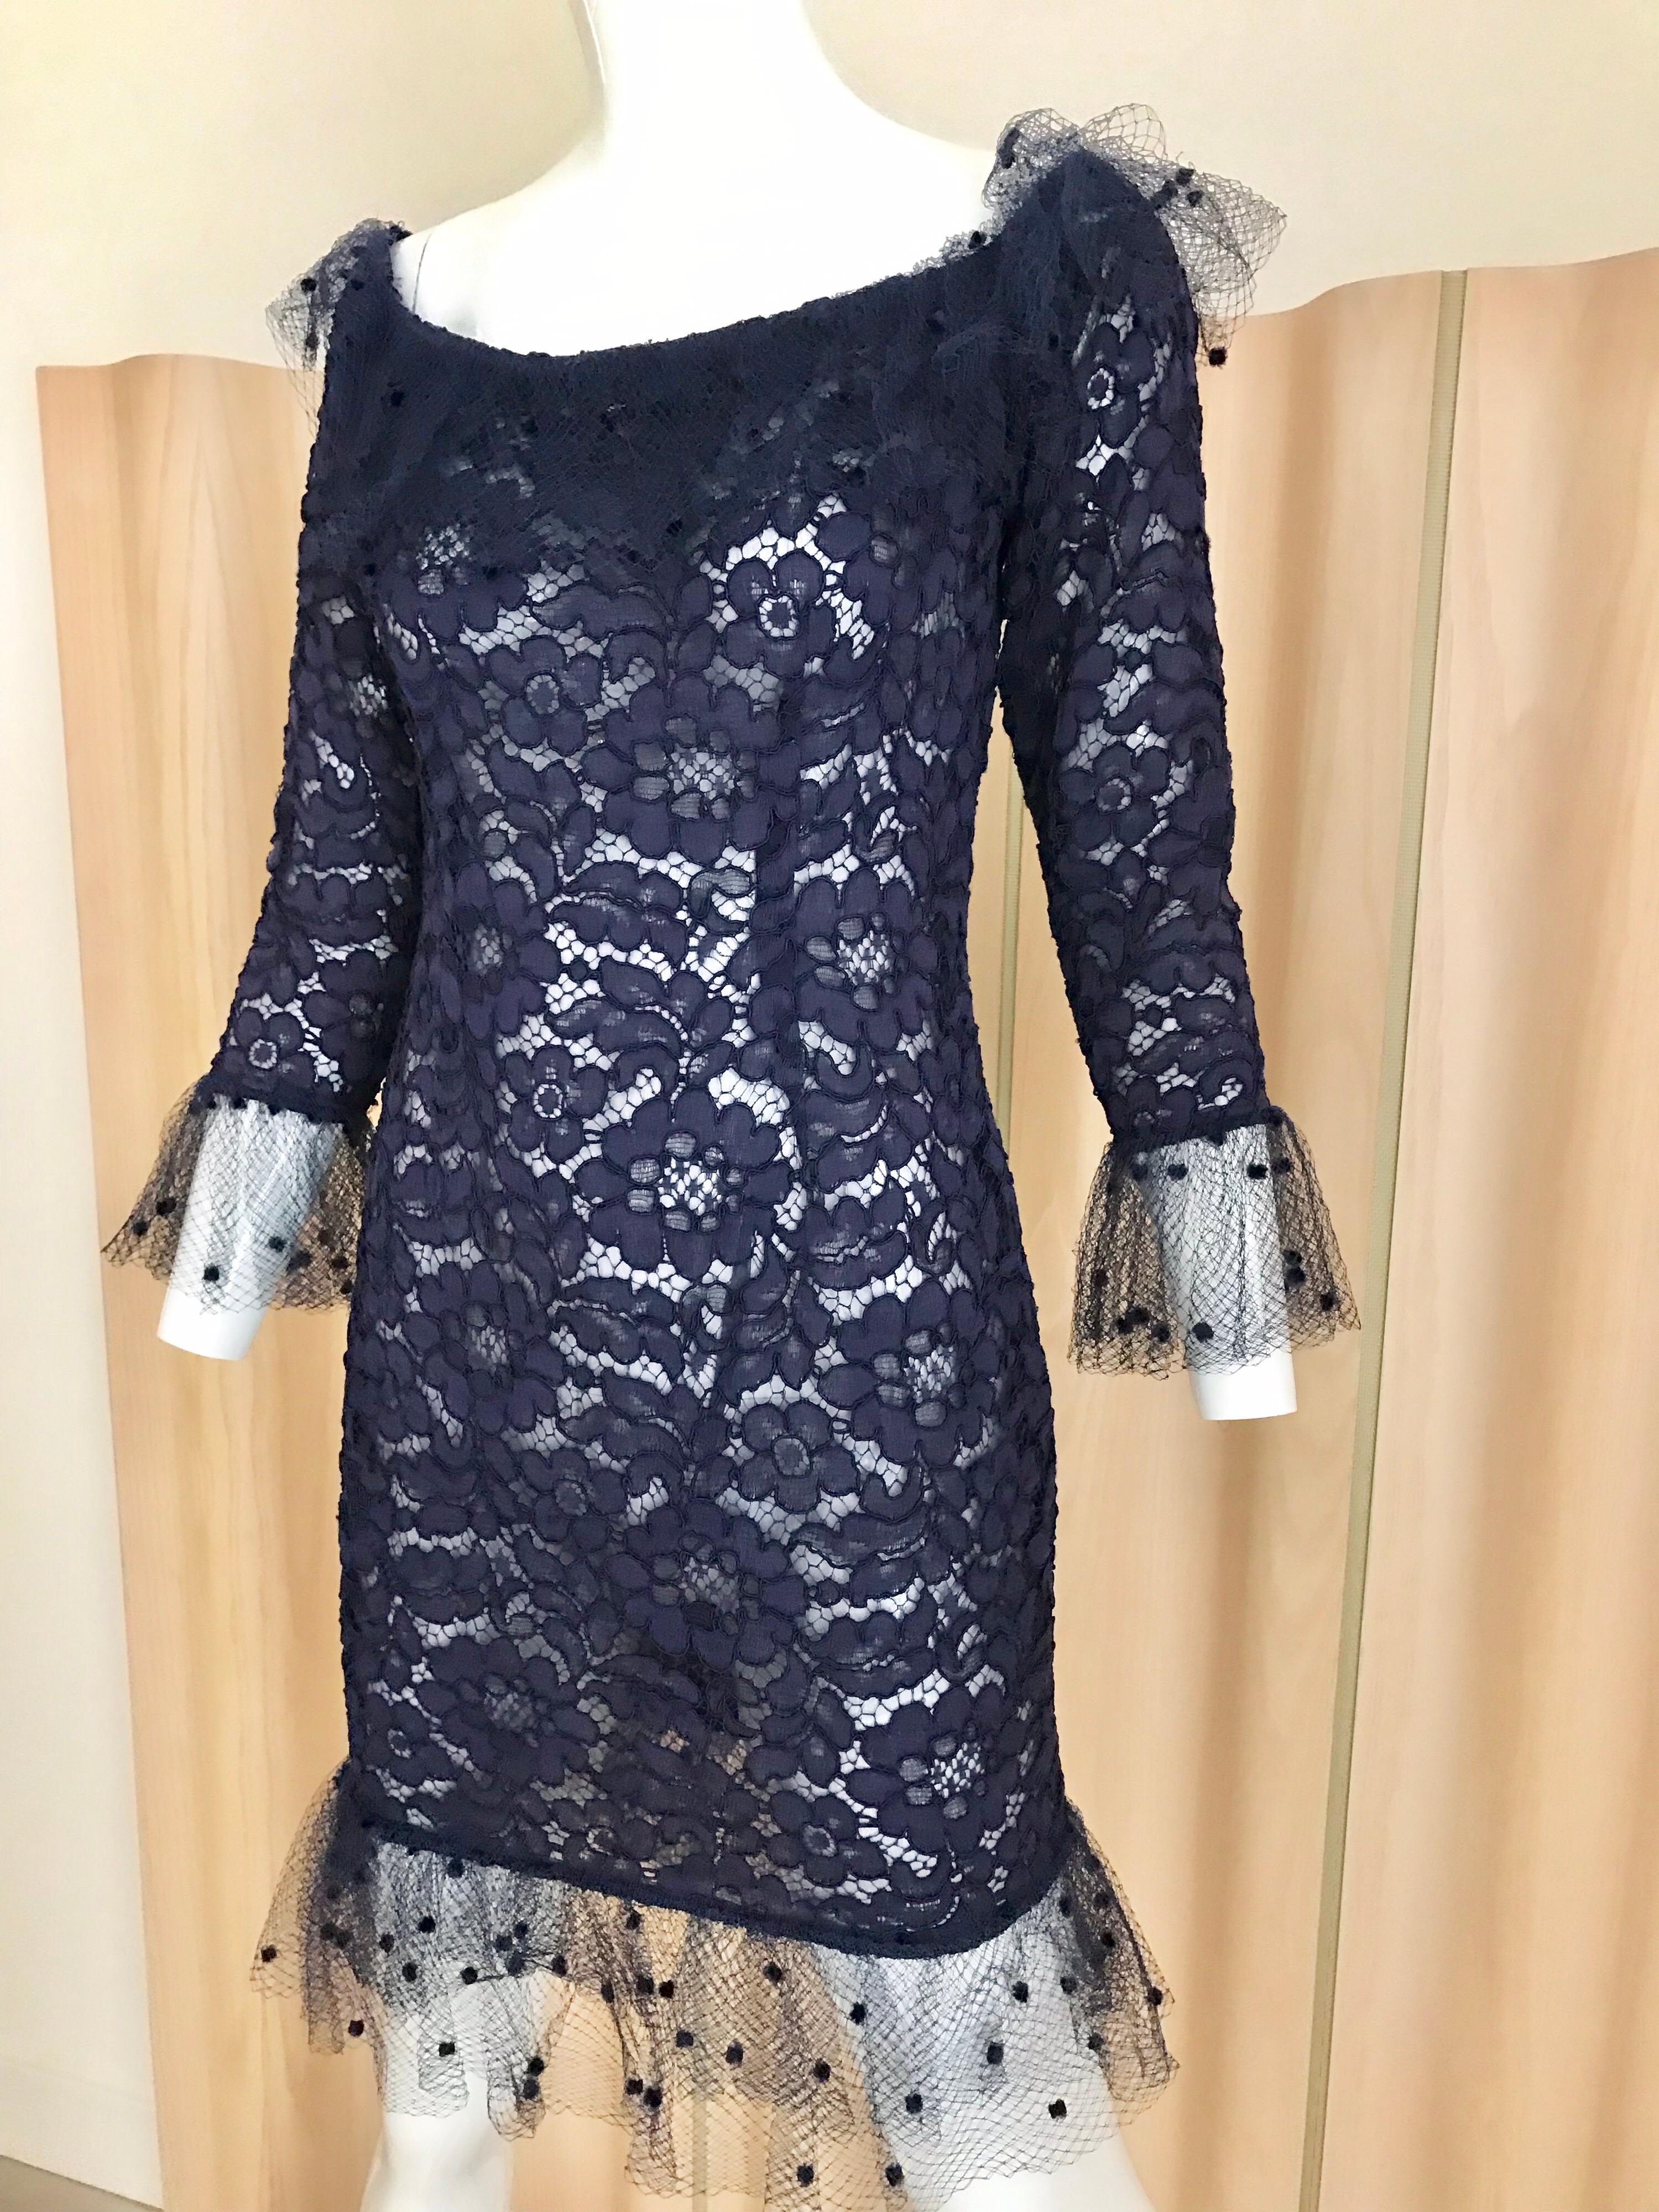 Chic Vintage Yves Saint Laurent Blue Lace sheath cocktail dress with delicate tulle netting lace on collar and sleeves. Perfect cocktail dress.
Size: 4